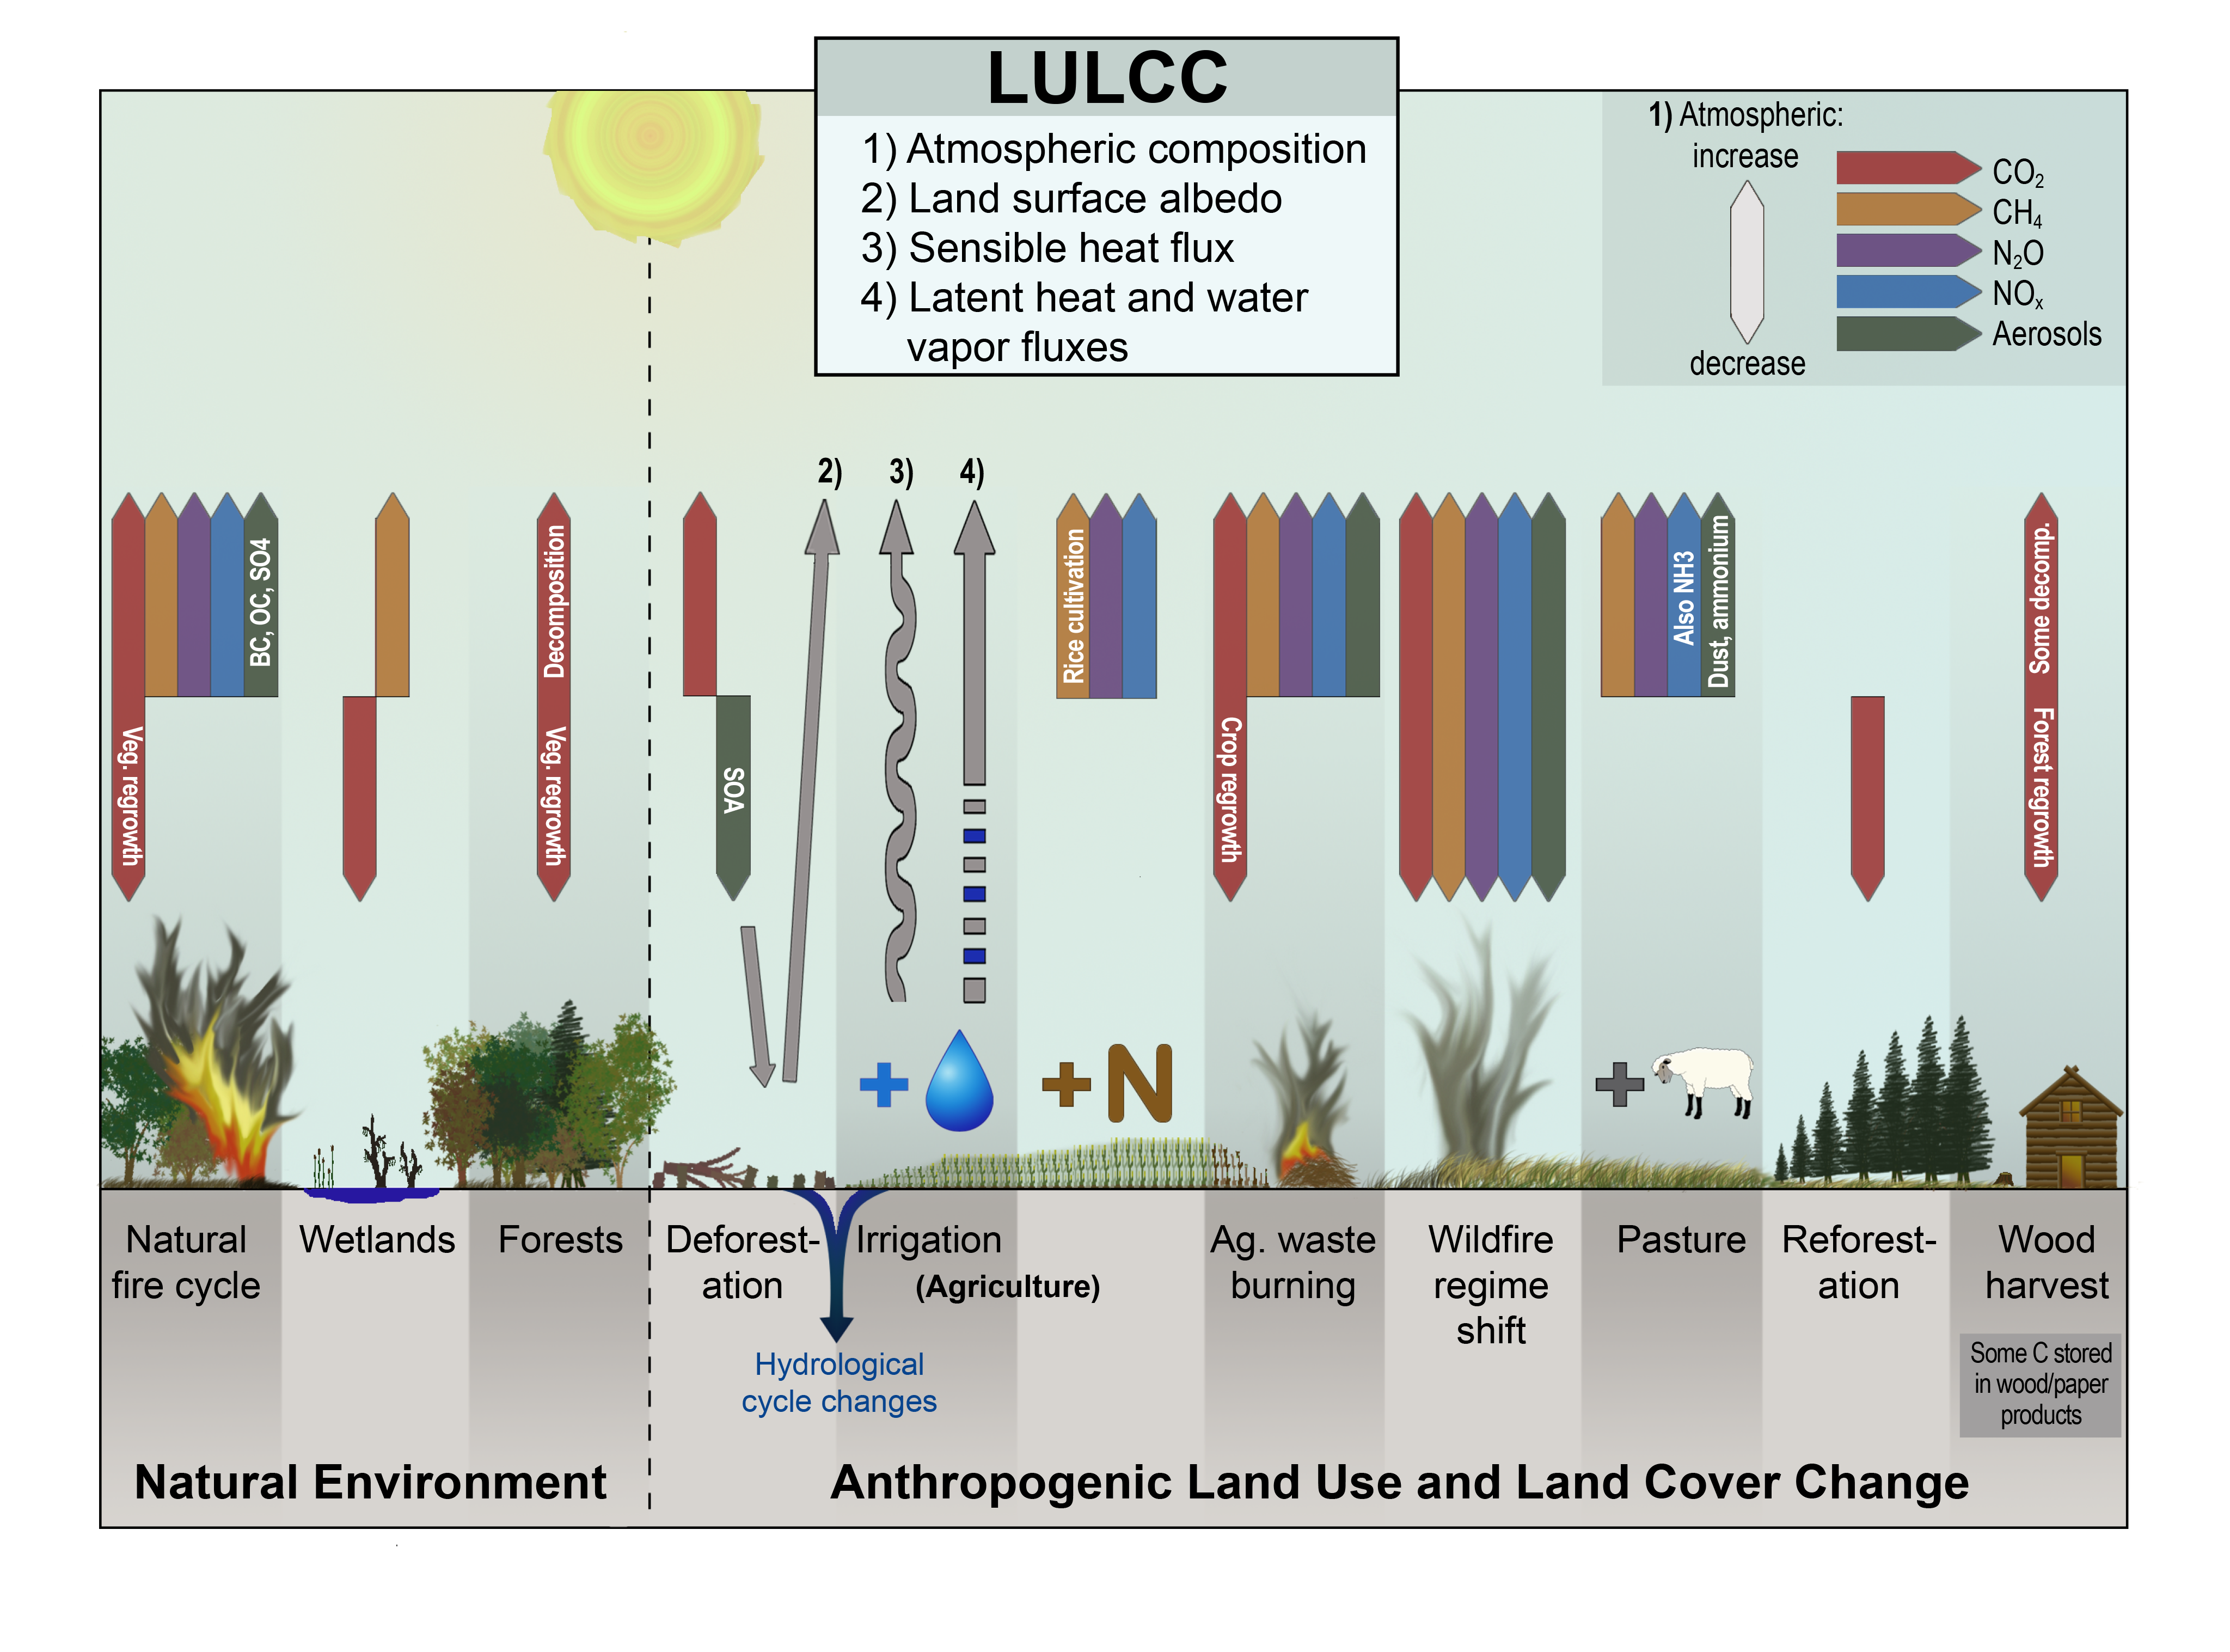 Changes in Land Cover and Terrestrial Biogeochemistry - Climate